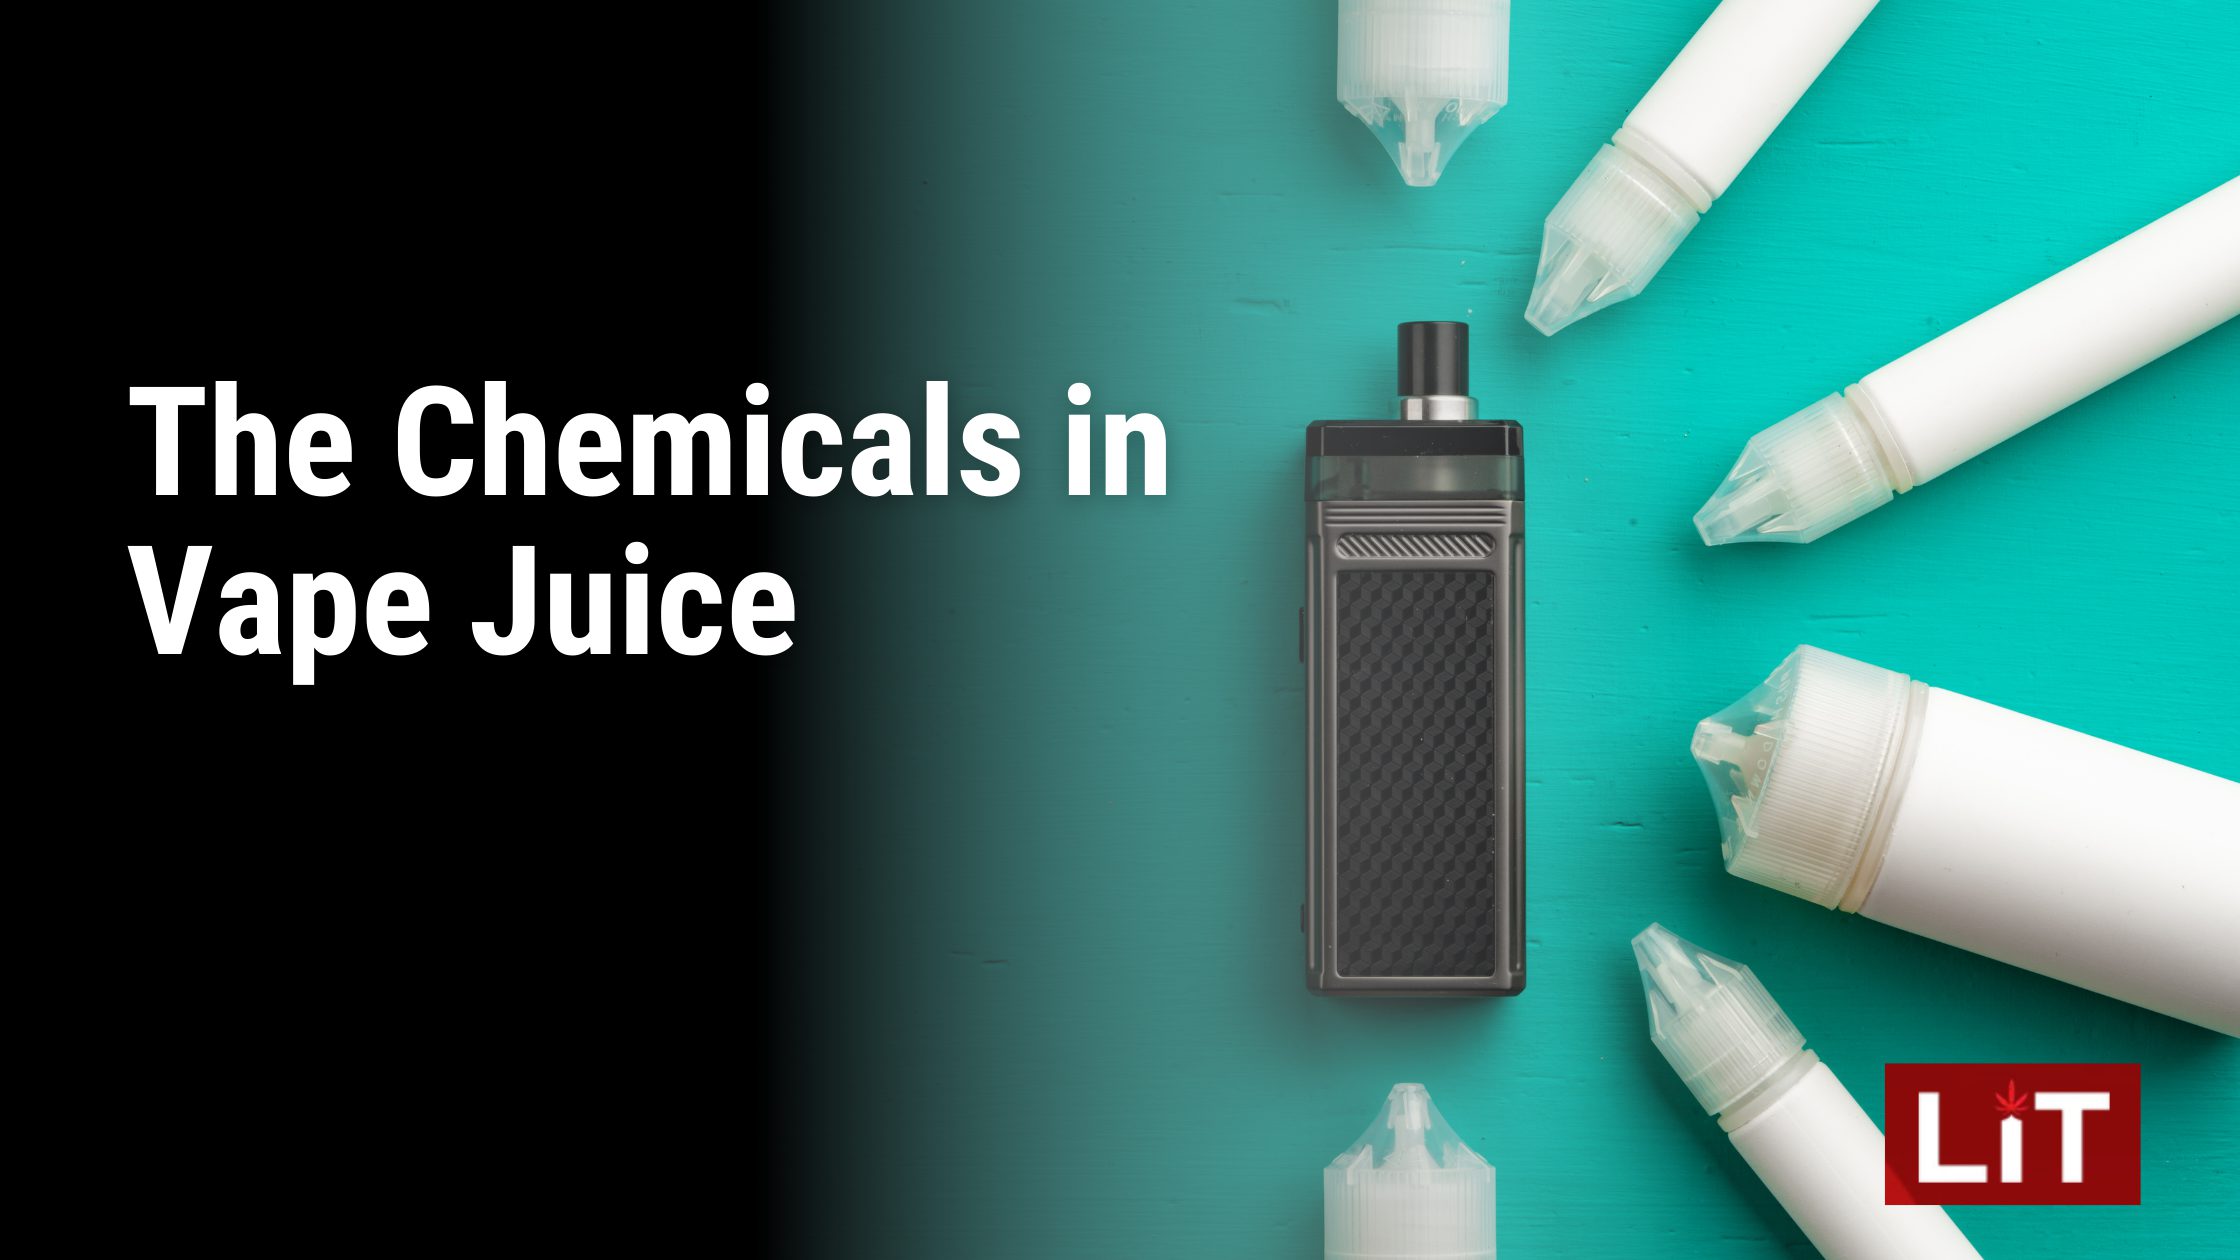 The Chemicals in Vape Juice